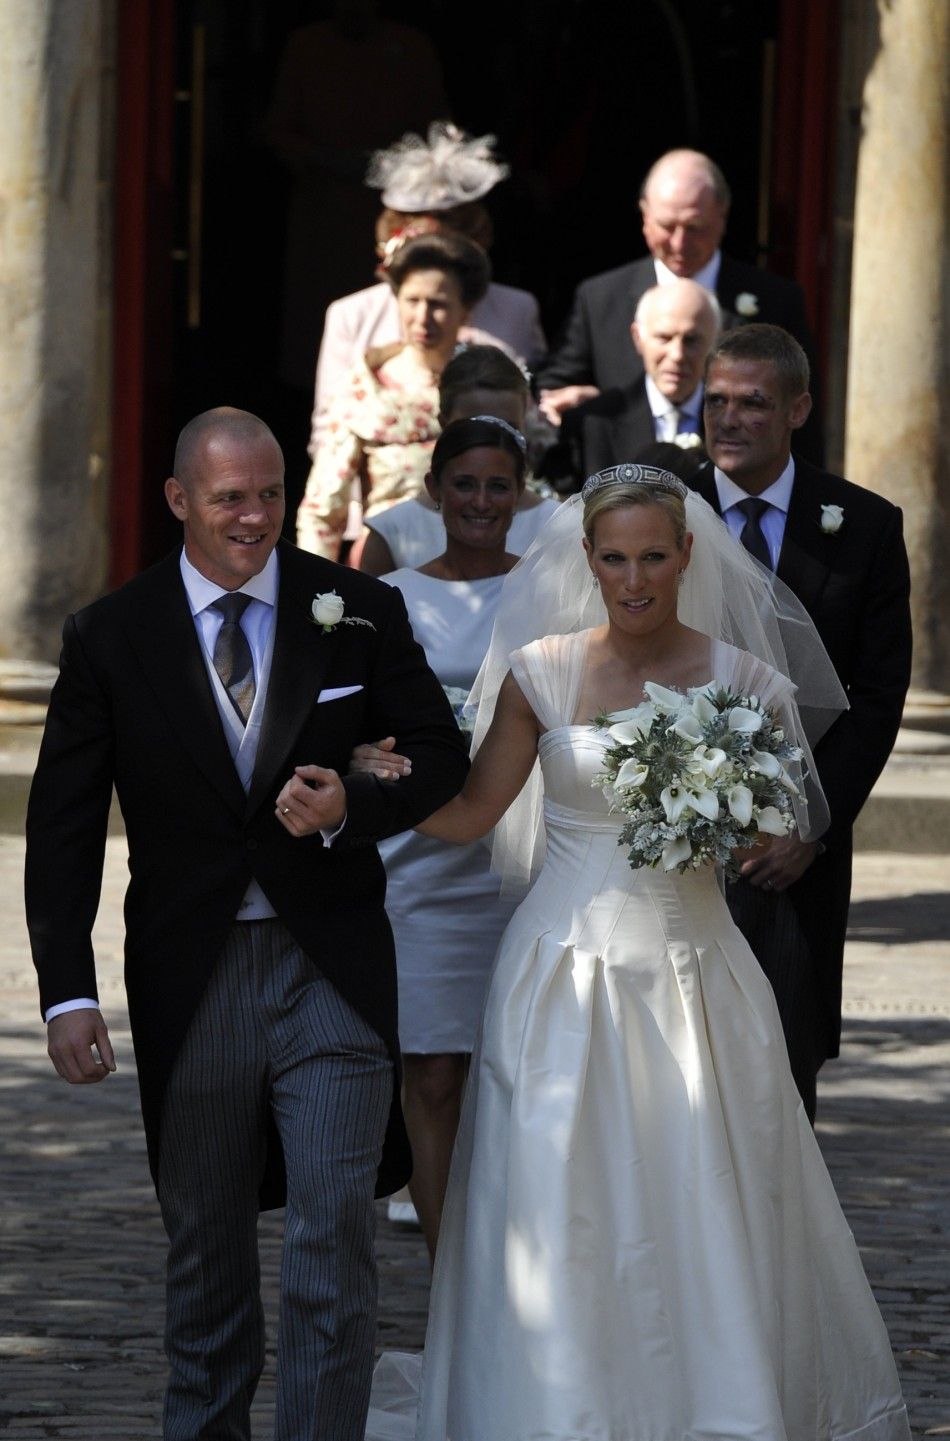 Britains Zara Phillips and her husband England rugby captain Mike Tindall leave the church after their marriage at Canongate Kirk in Edinburgh